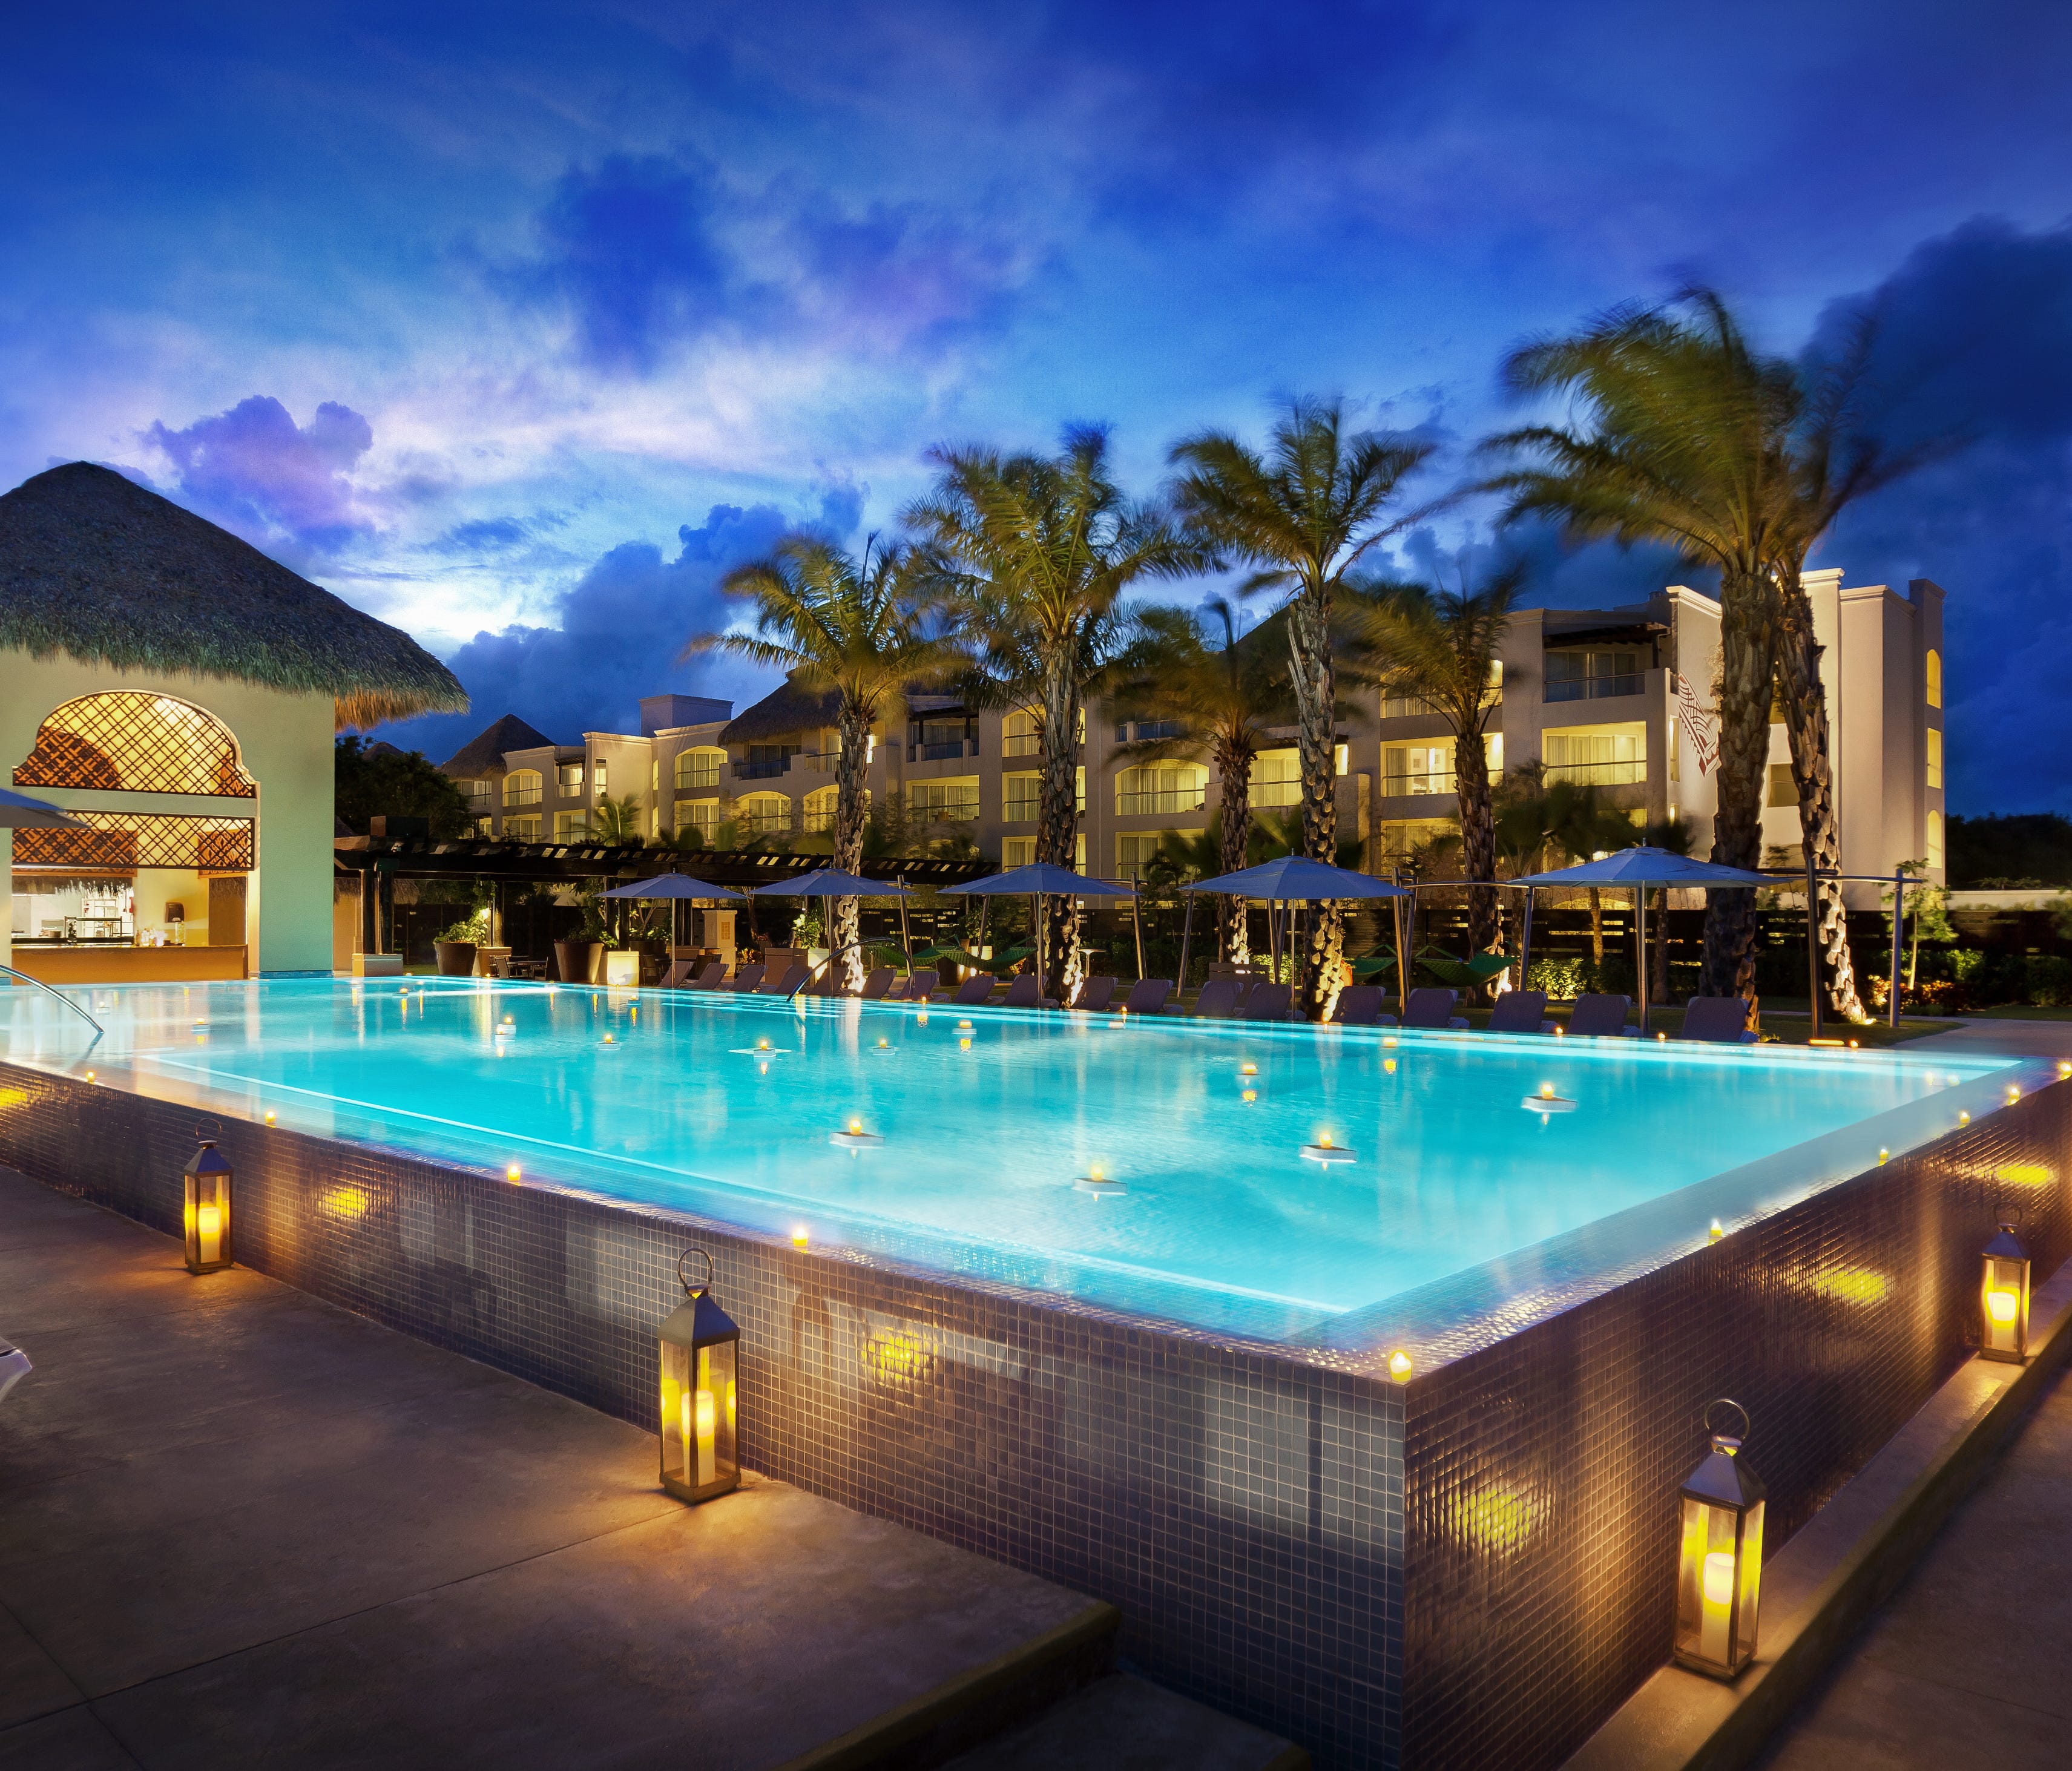 The Hard Rock Hotel Punta Cana has 13 pools including the adults-only pool, Eden (pictured).